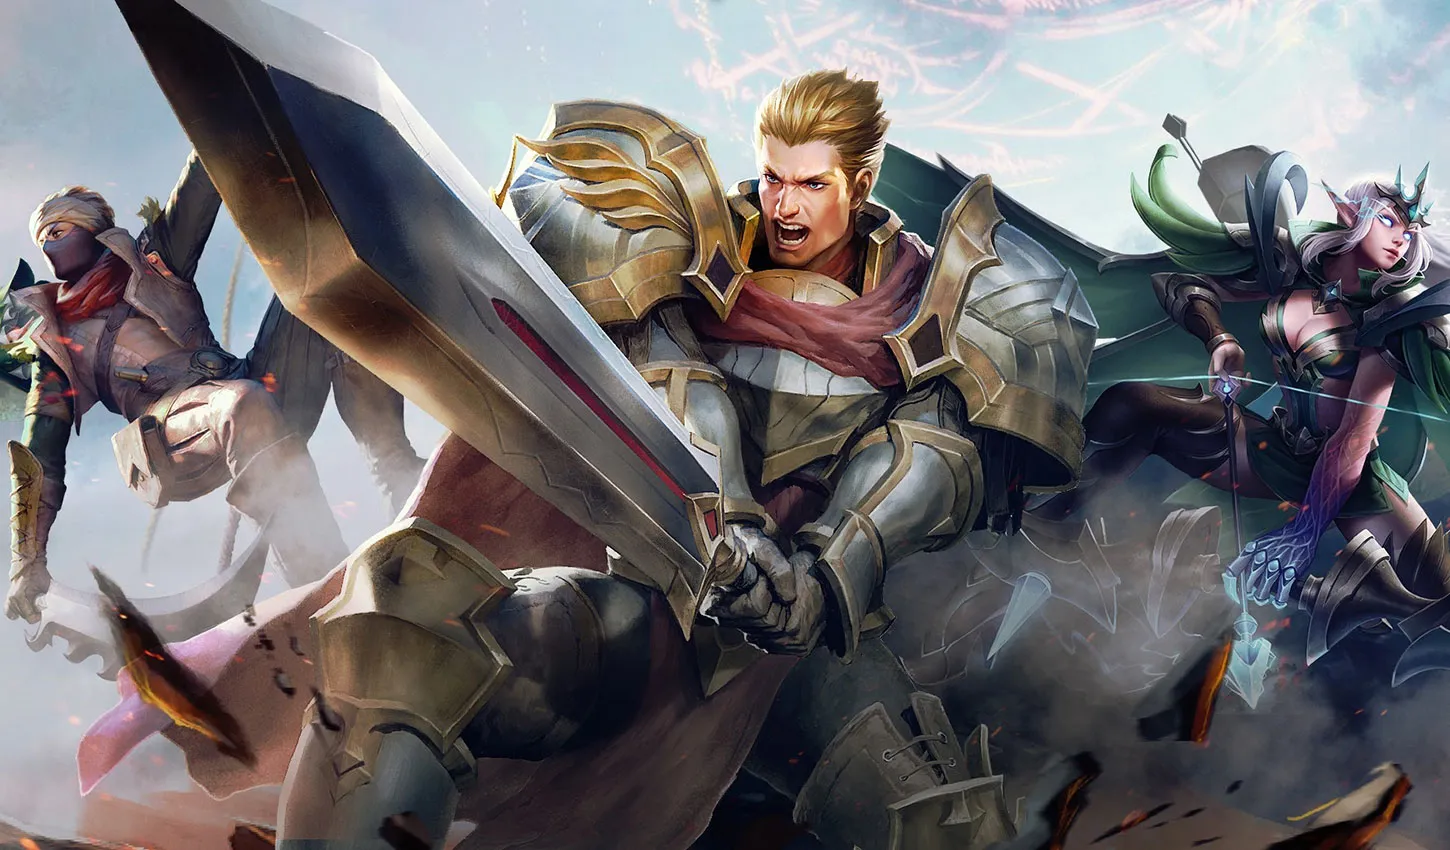 Is Clash of Titans an Arena of Valor Clone?